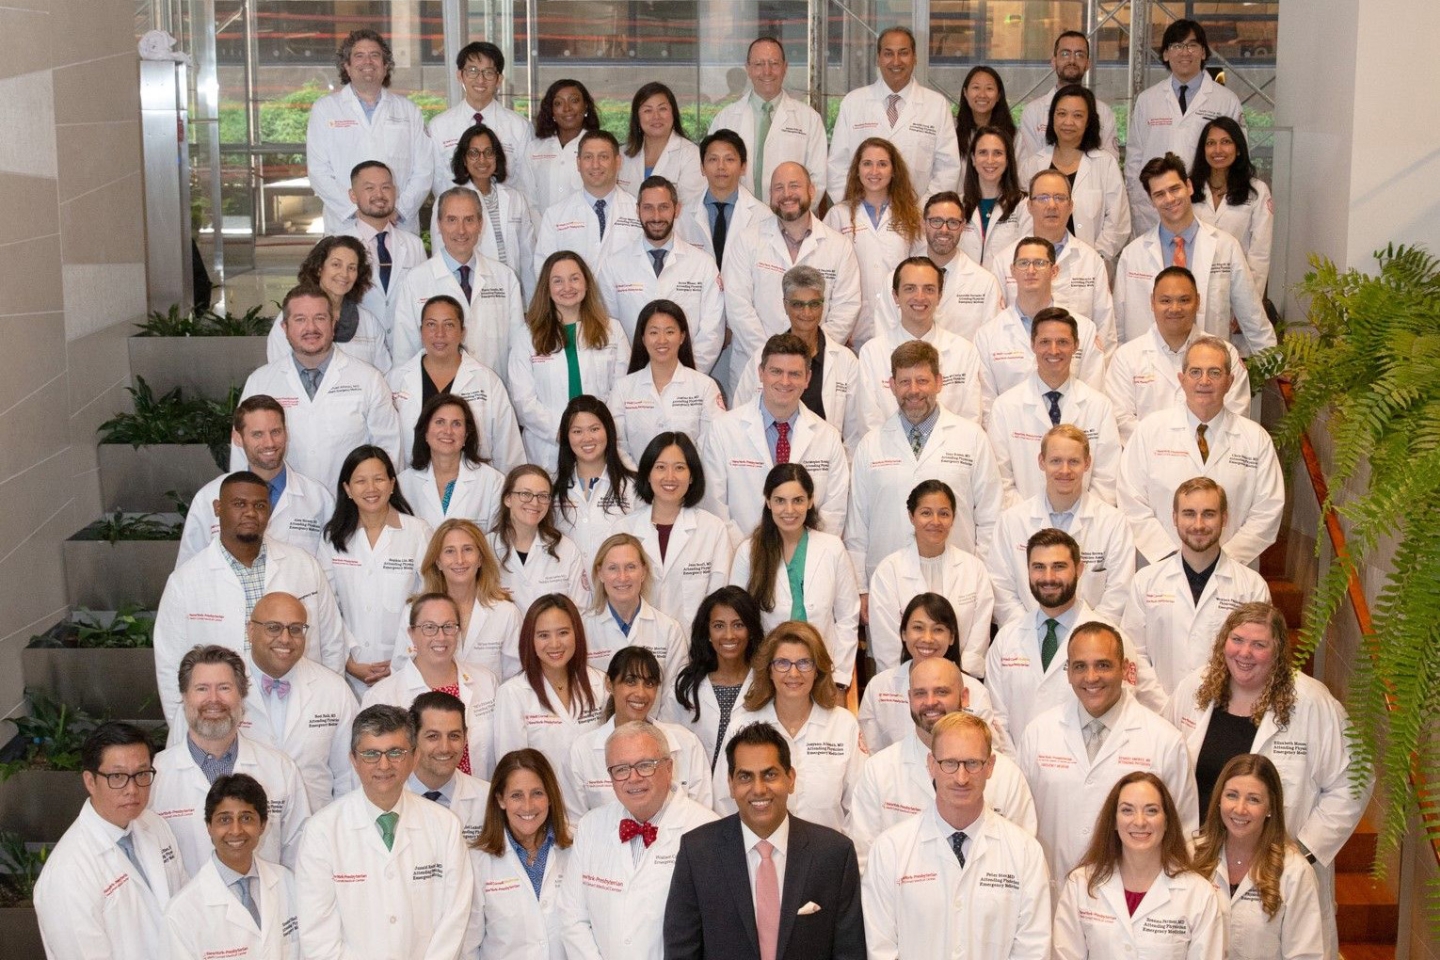 Group photo of the providers in the Department of Emergency Medicine